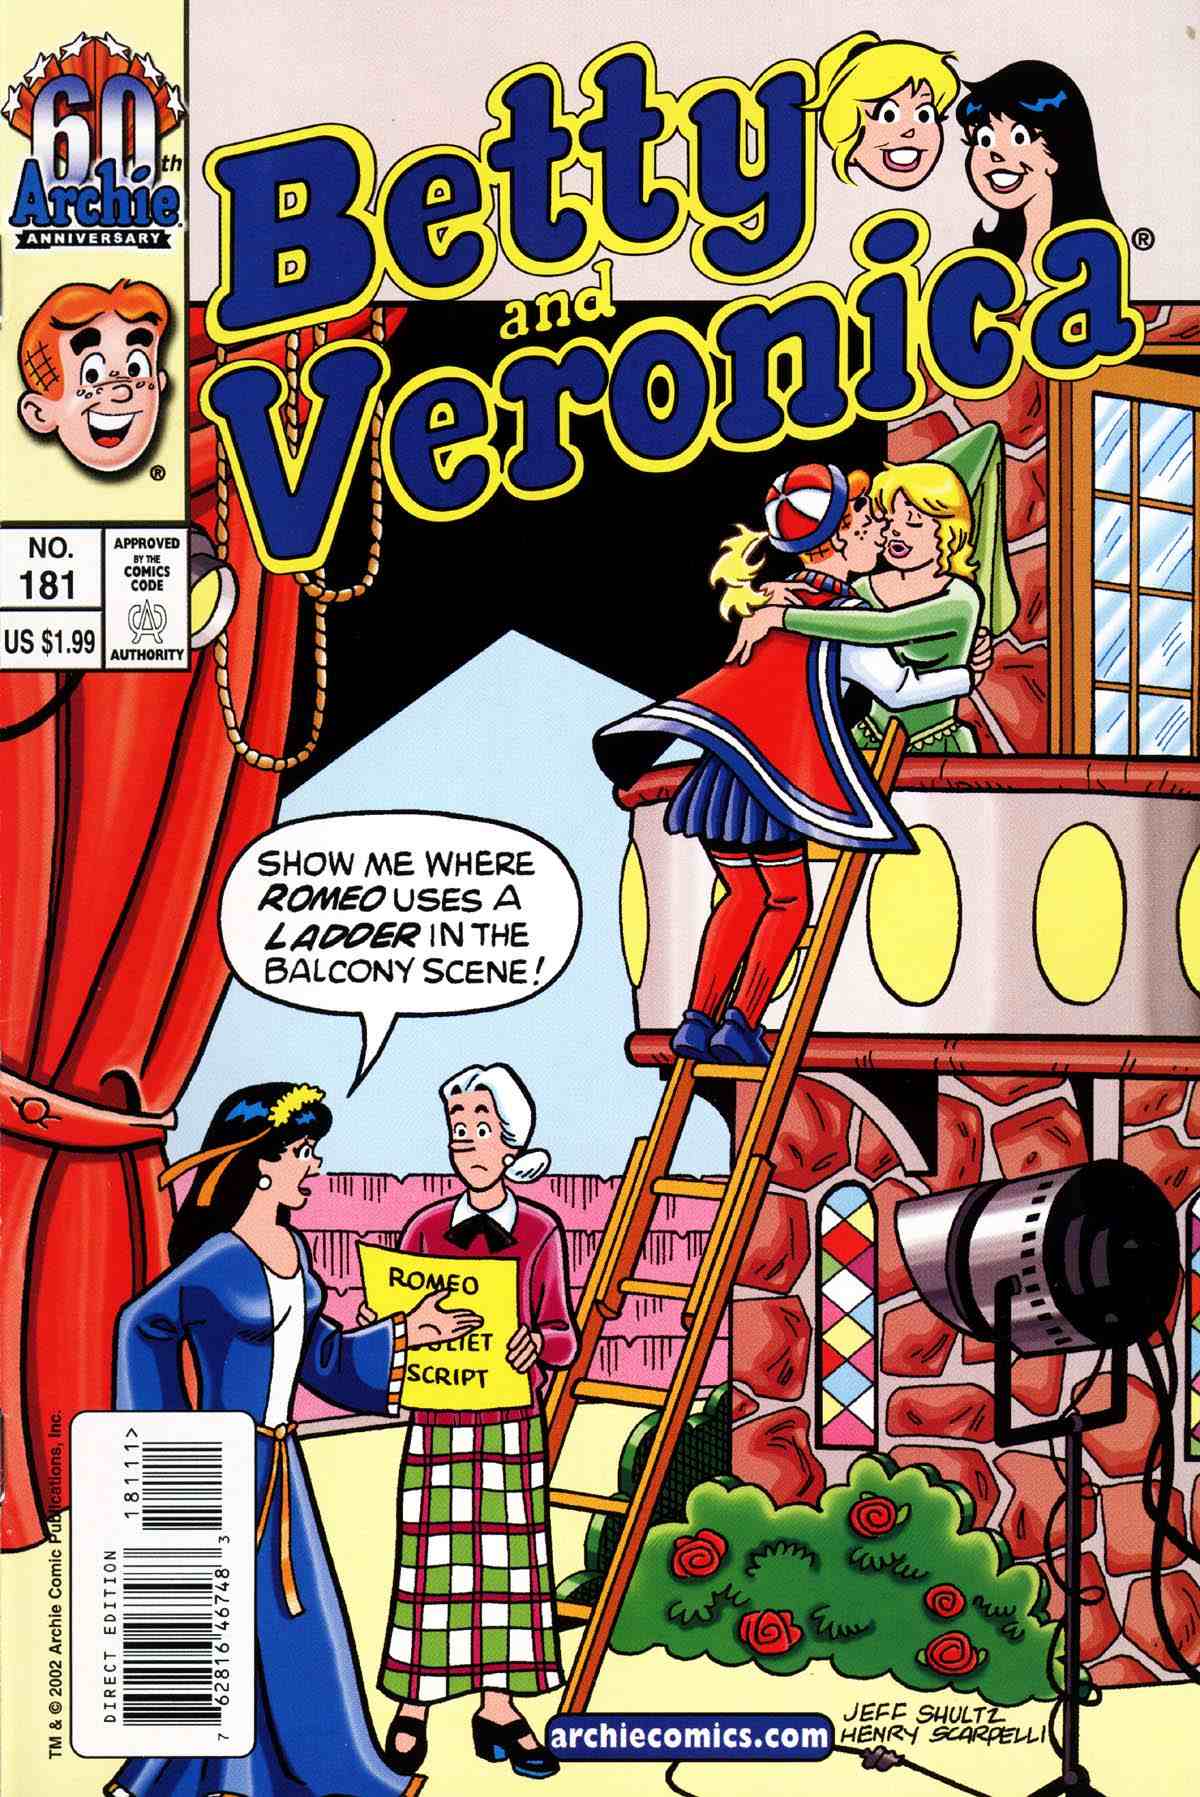 Read online Archie's Girls Betty and Veronica comic -  Issue #181 - 1